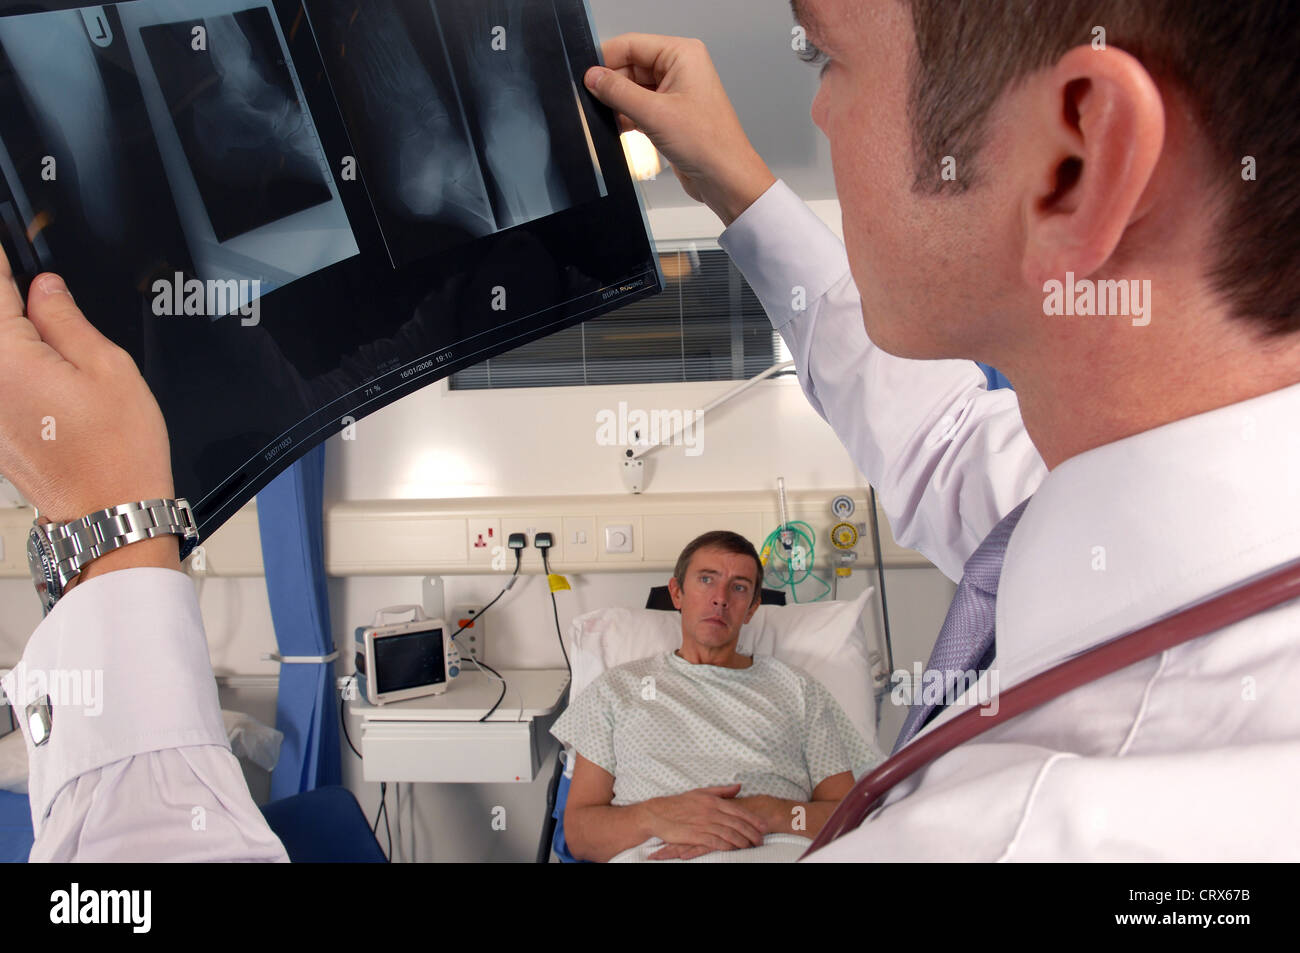 A doctor on his hospital ward round examines a patient's x-ray. Stock Photo